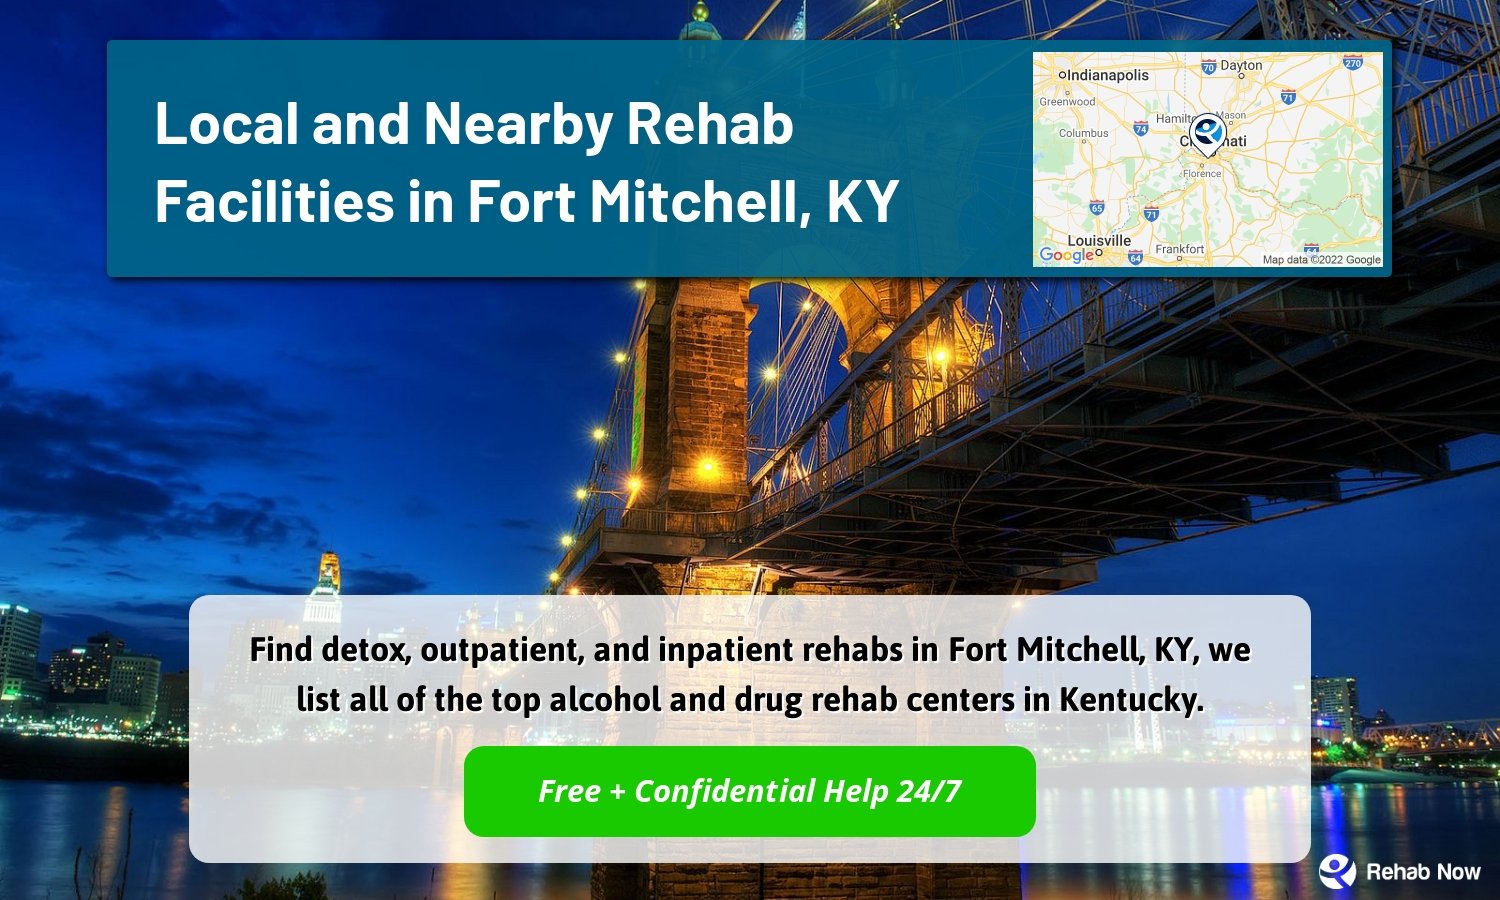 Find detox, outpatient, and inpatient rehabs in Fort Mitchell, KY, we list all of the top alcohol and drug rehab centers in Kentucky.